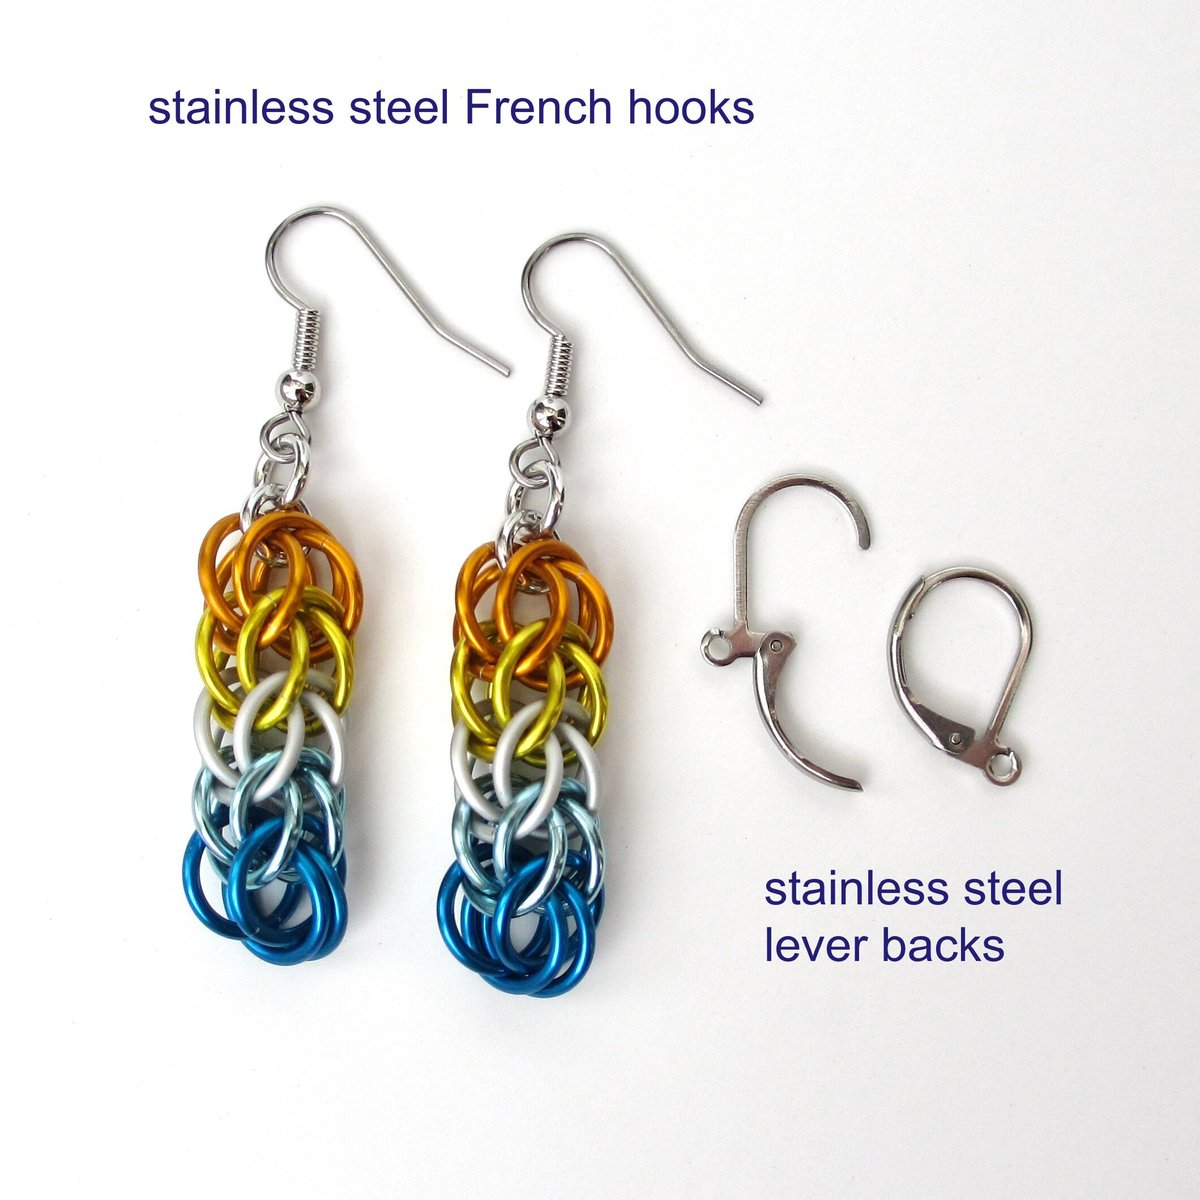 Aroace pride earrings, chainmail full Persian weave, lightweight anodized aluminum LGBTQIA jewelry